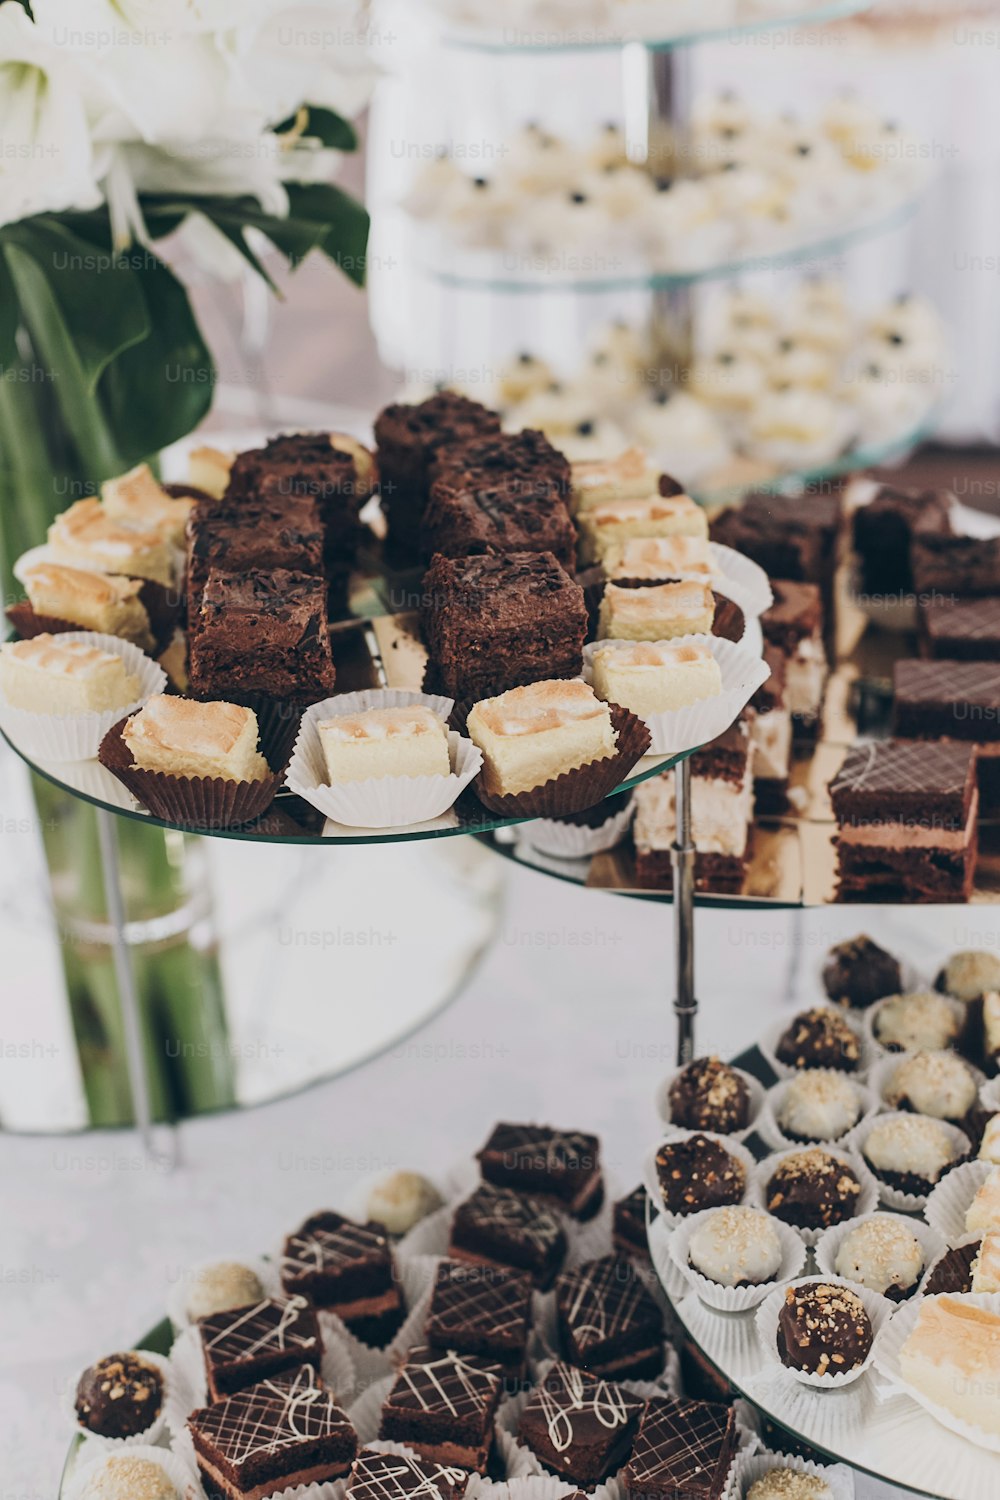 Wedding candy bar. Delicious chocolate desserts, cakes and cookies on stand at wedding reception in restaurant. Luxury catering service